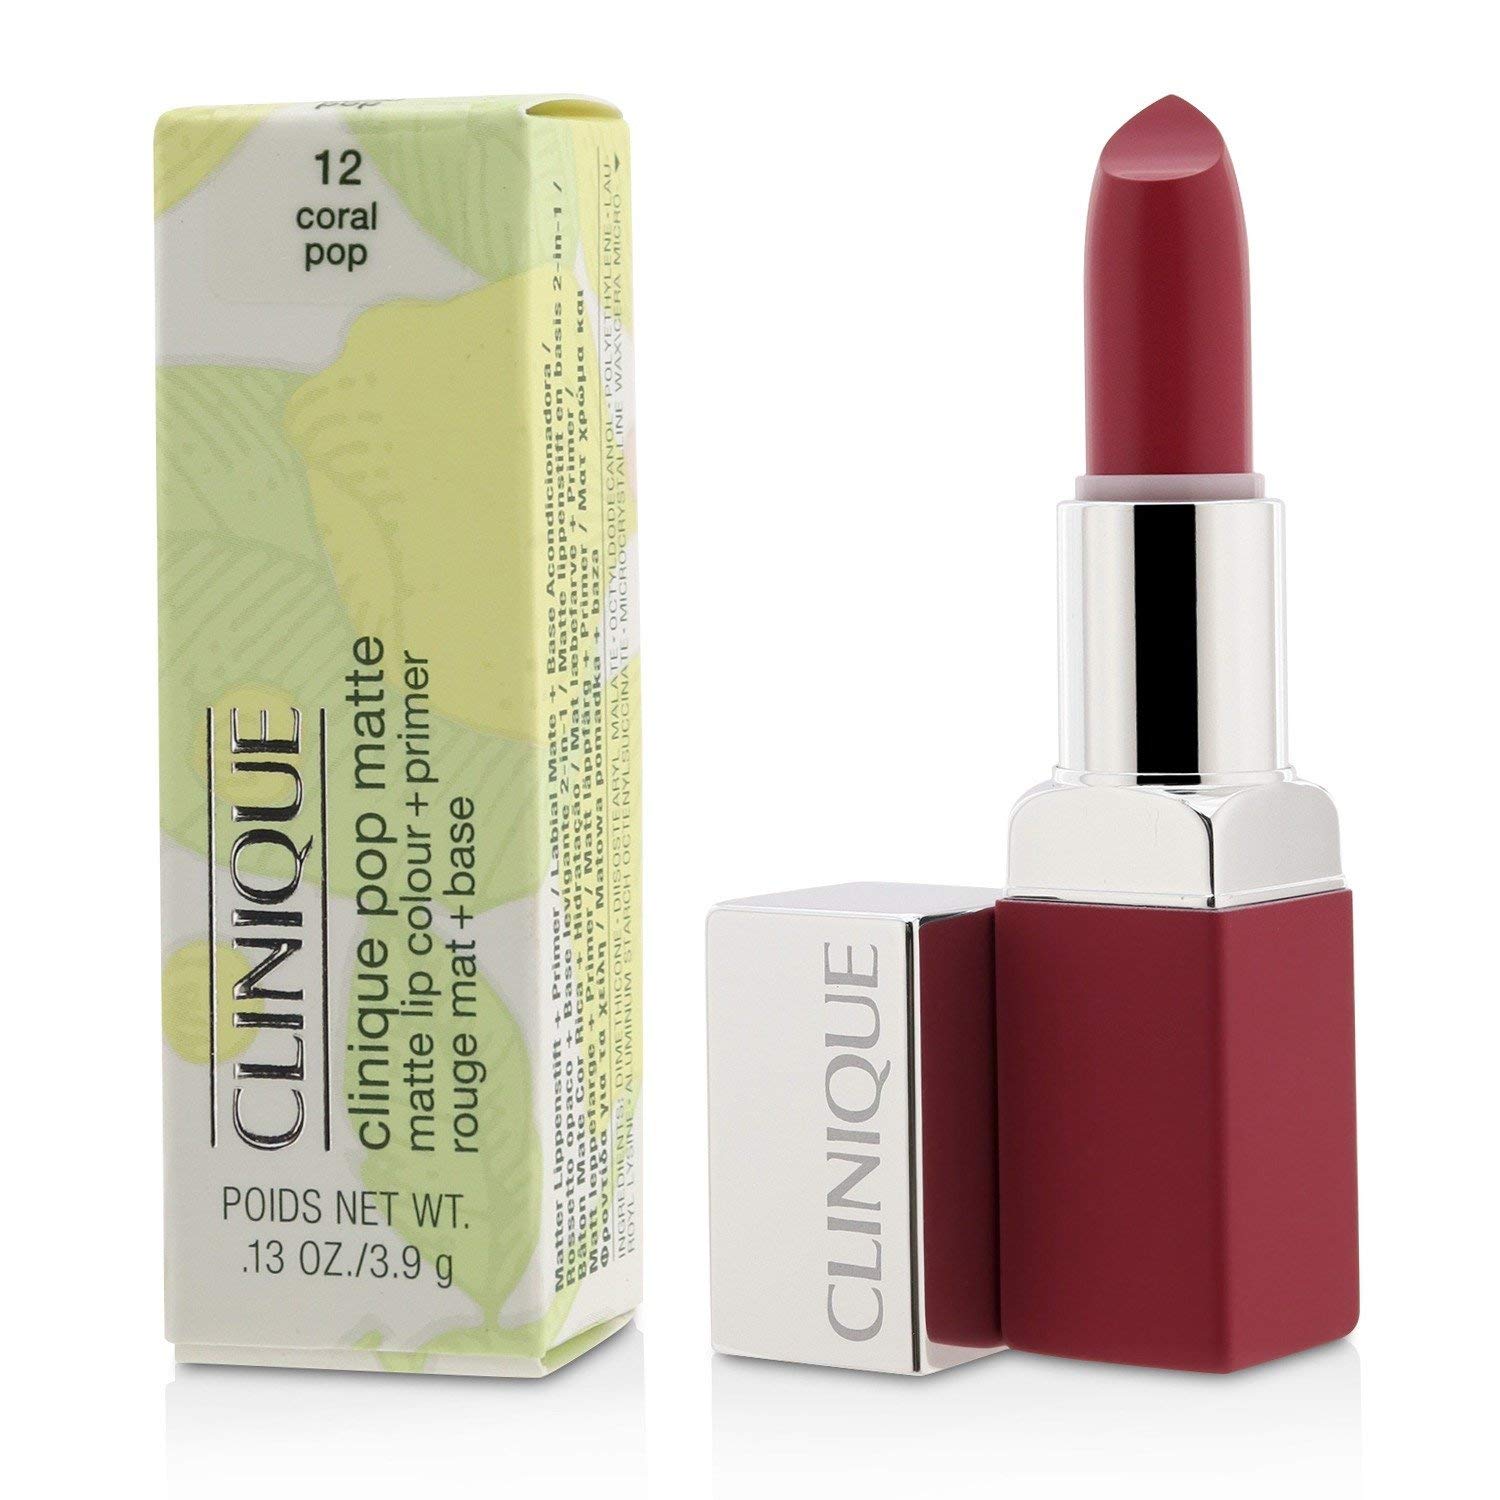 Clinique 12 CORAL POP Coral 0.13 Ounce (Pack of 1)